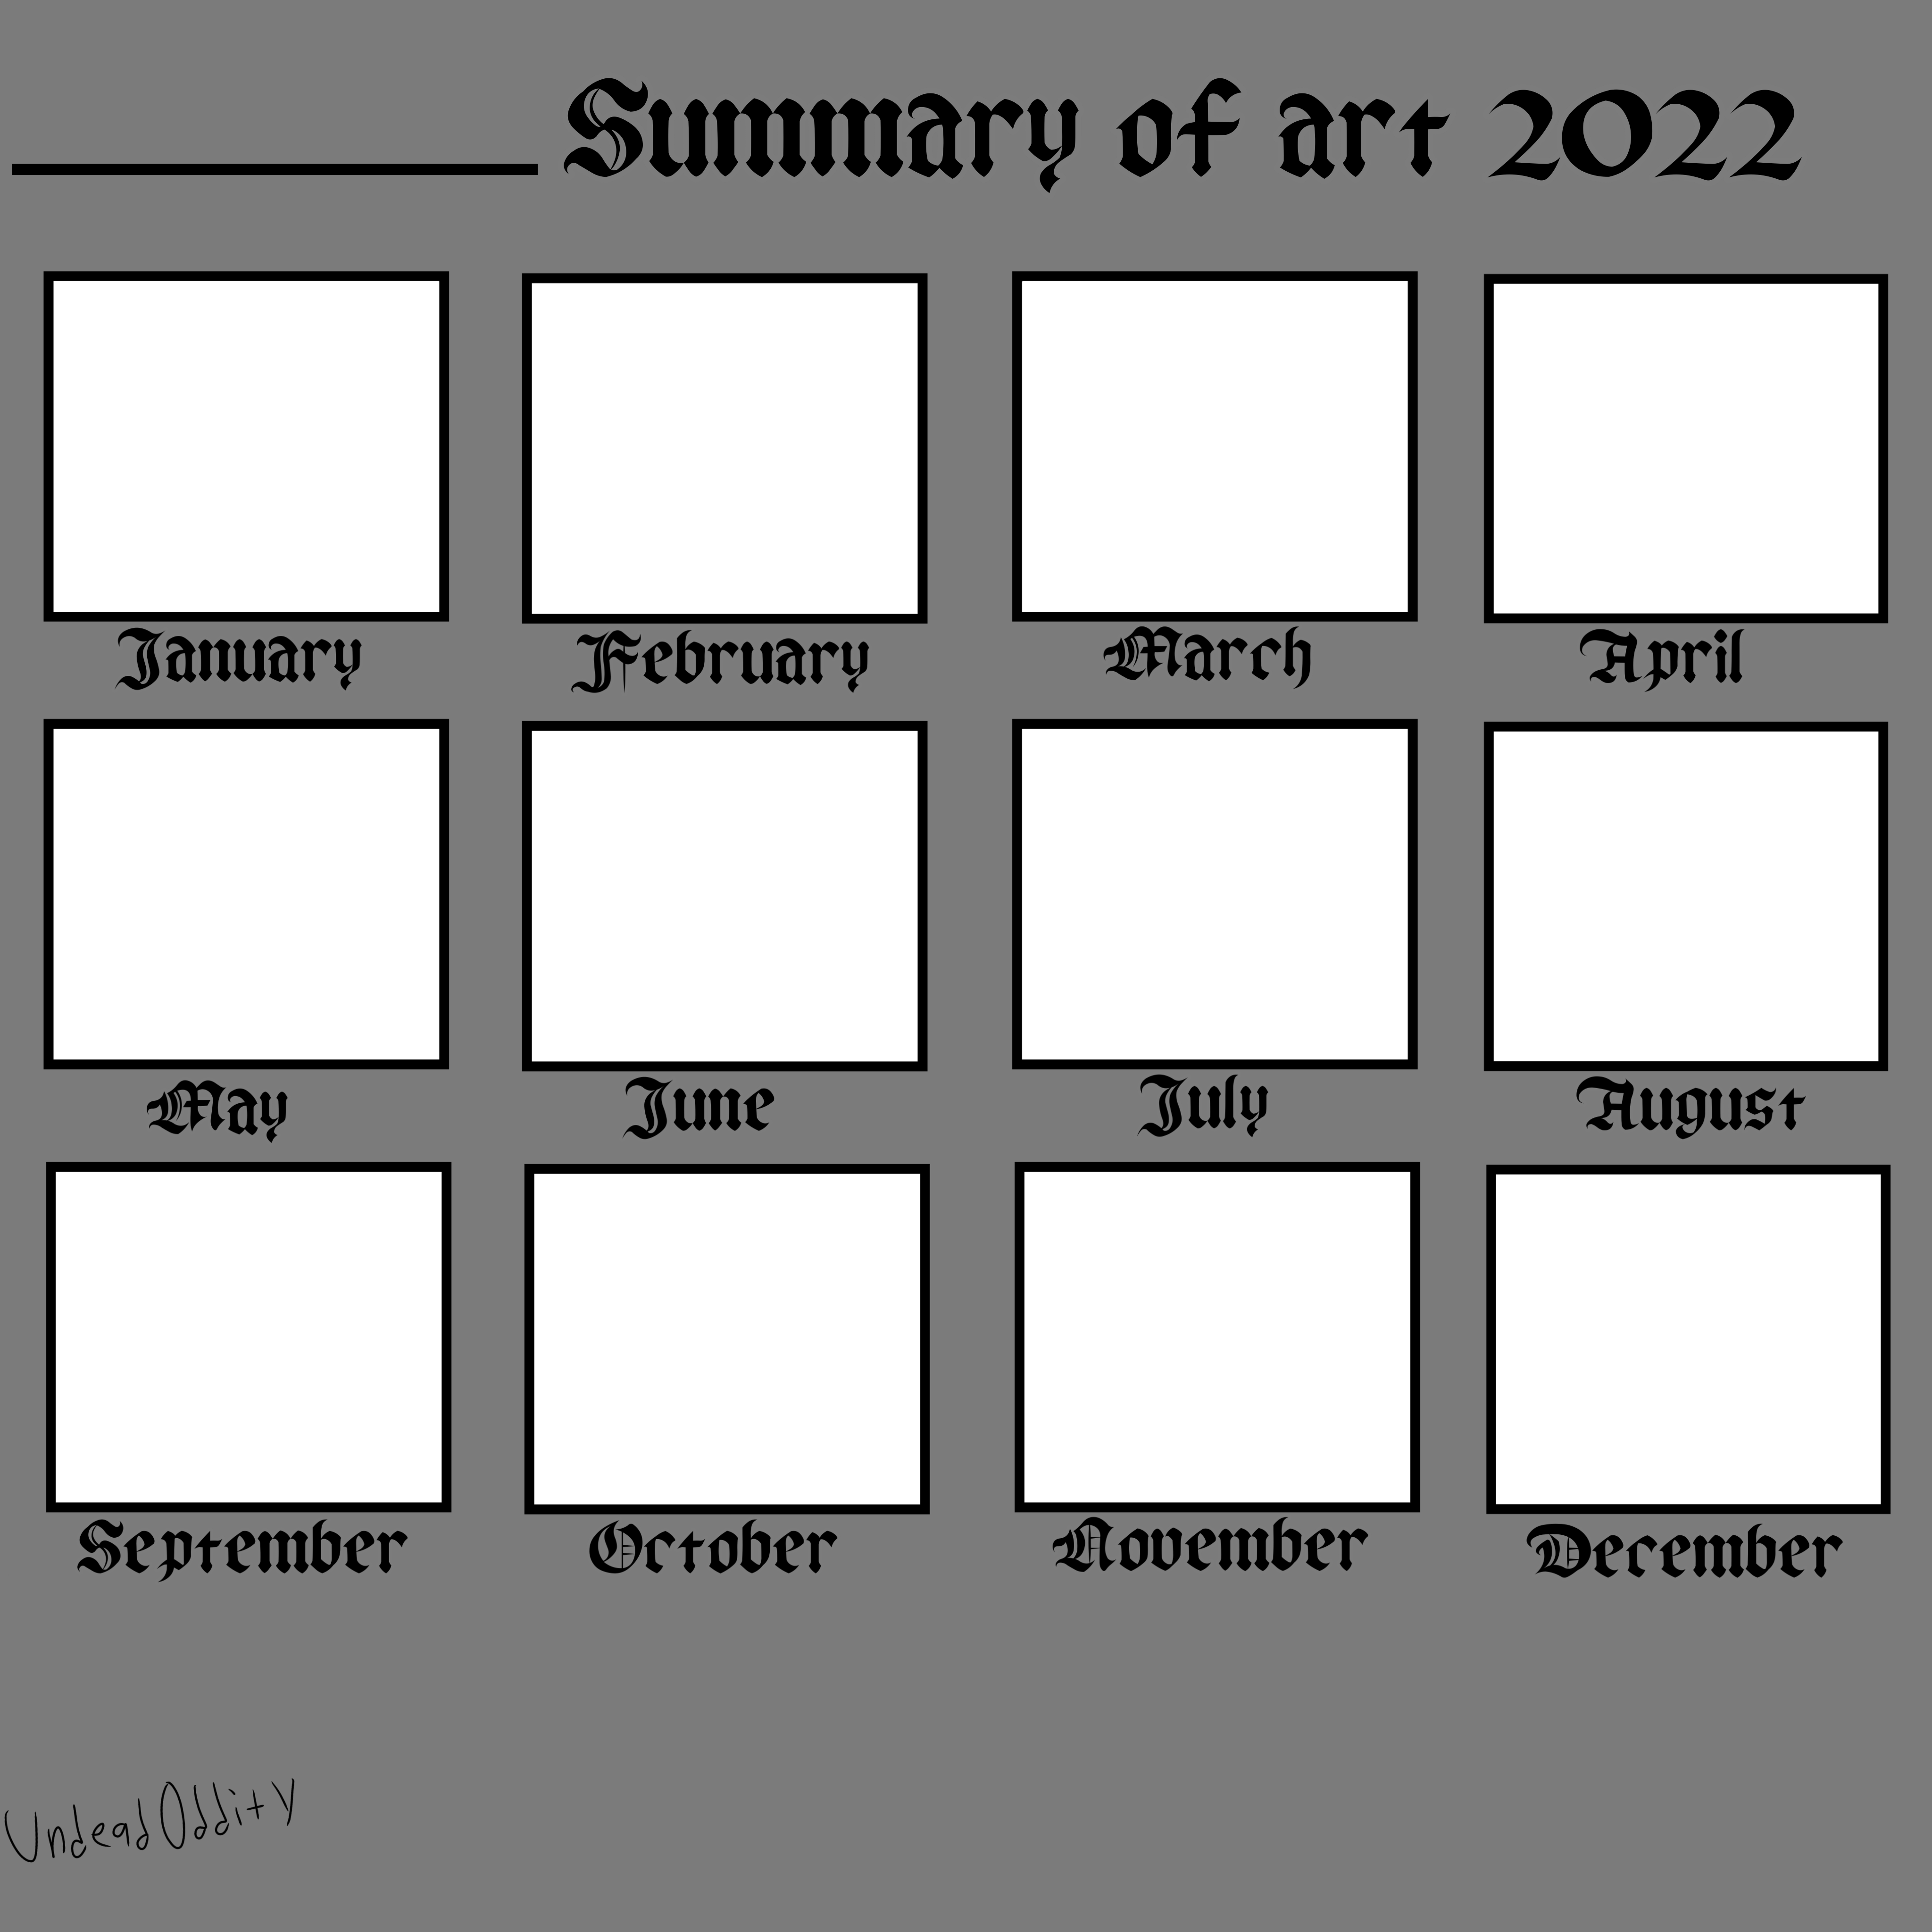 Art summary of 2022 template by Undead0ddity on DeviantArt